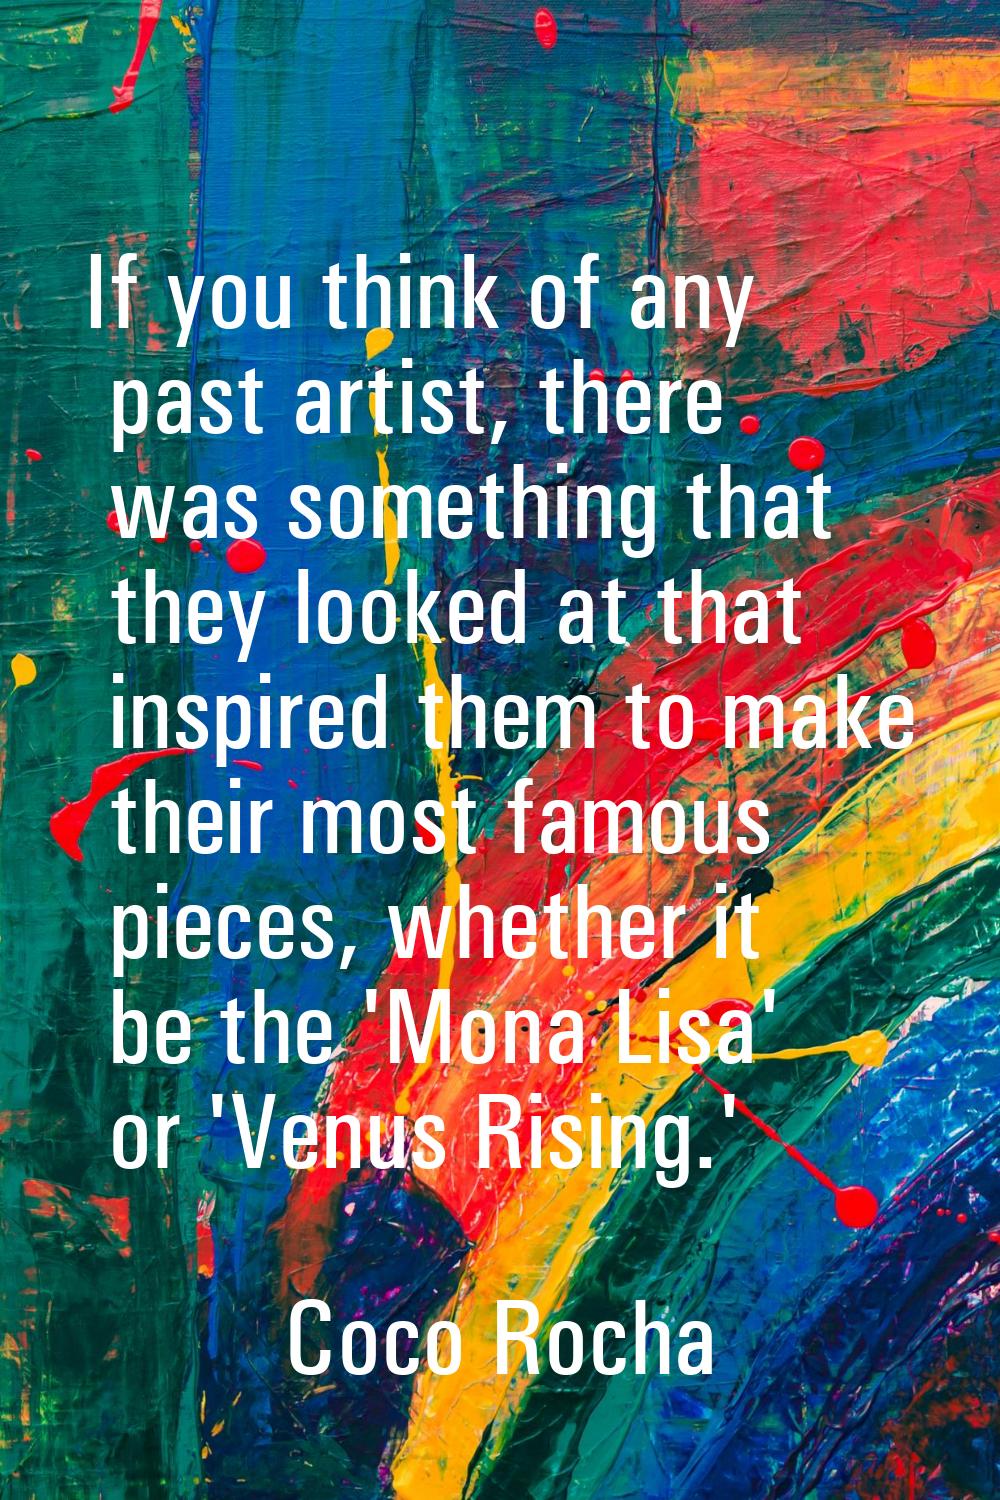 If you think of any past artist, there was something that they looked at that inspired them to make